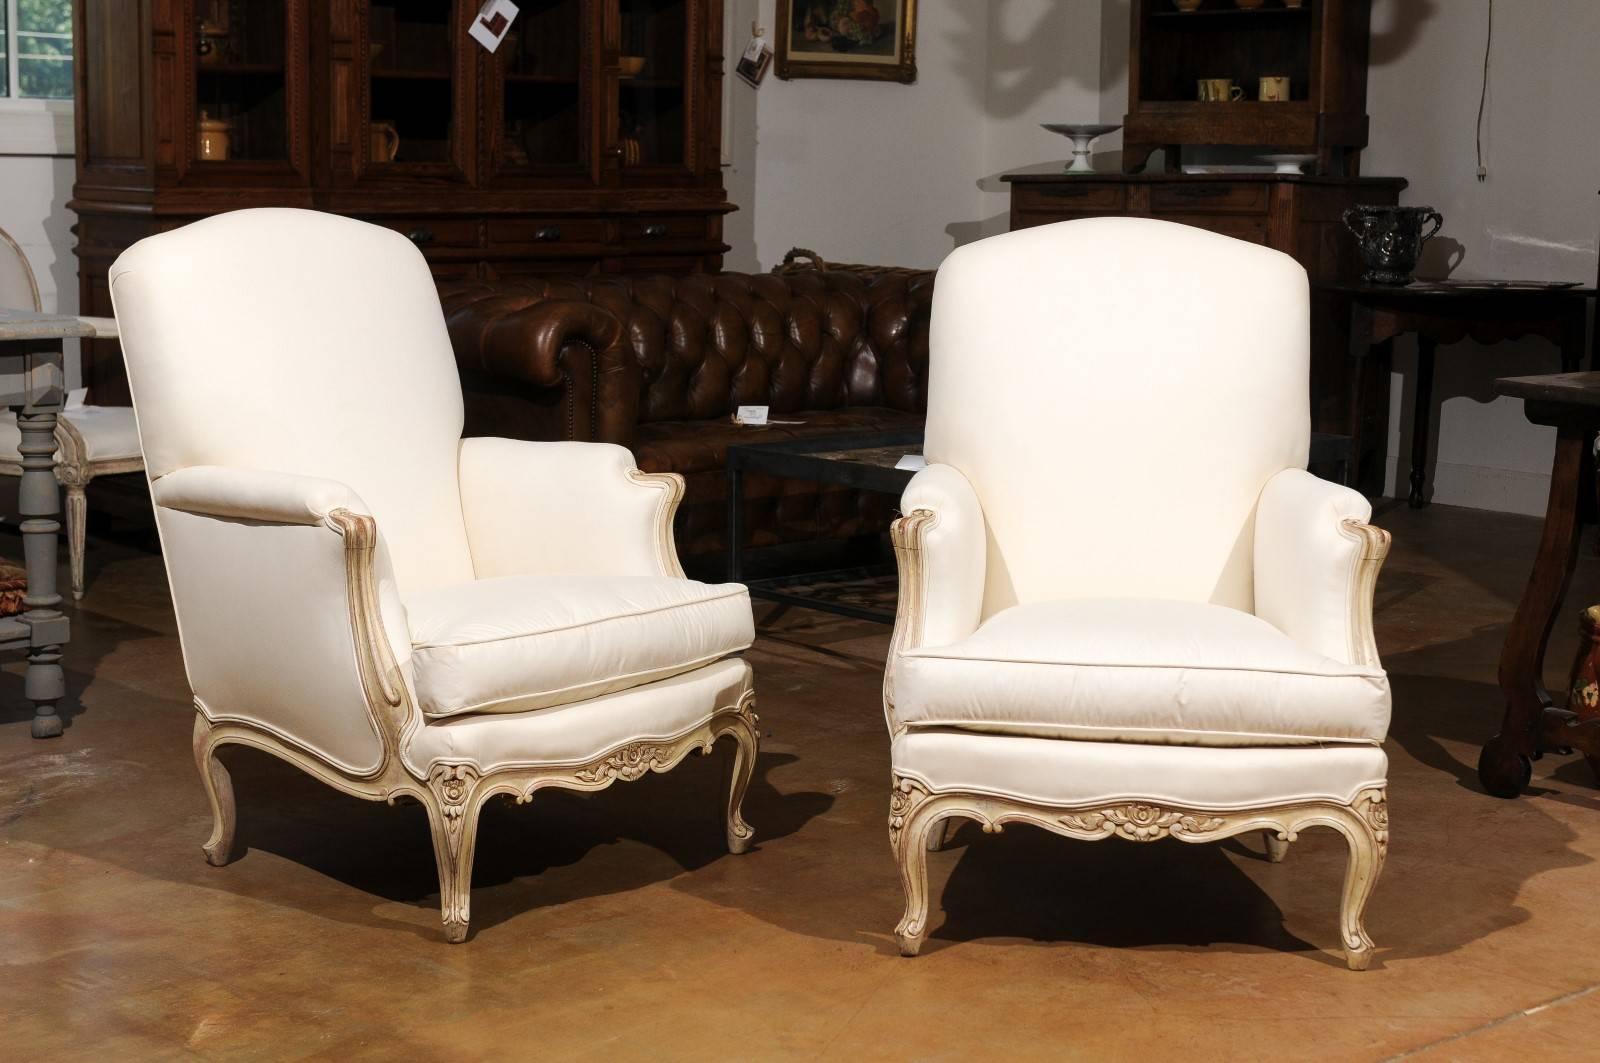 A pair of French Louis XV style painted wood bergère chairs from the early 20th century with carved skirt and new upholstery. Each of this pair of French painted bergères features a slanted back, flanked by two fully upholstered arms with scrolled